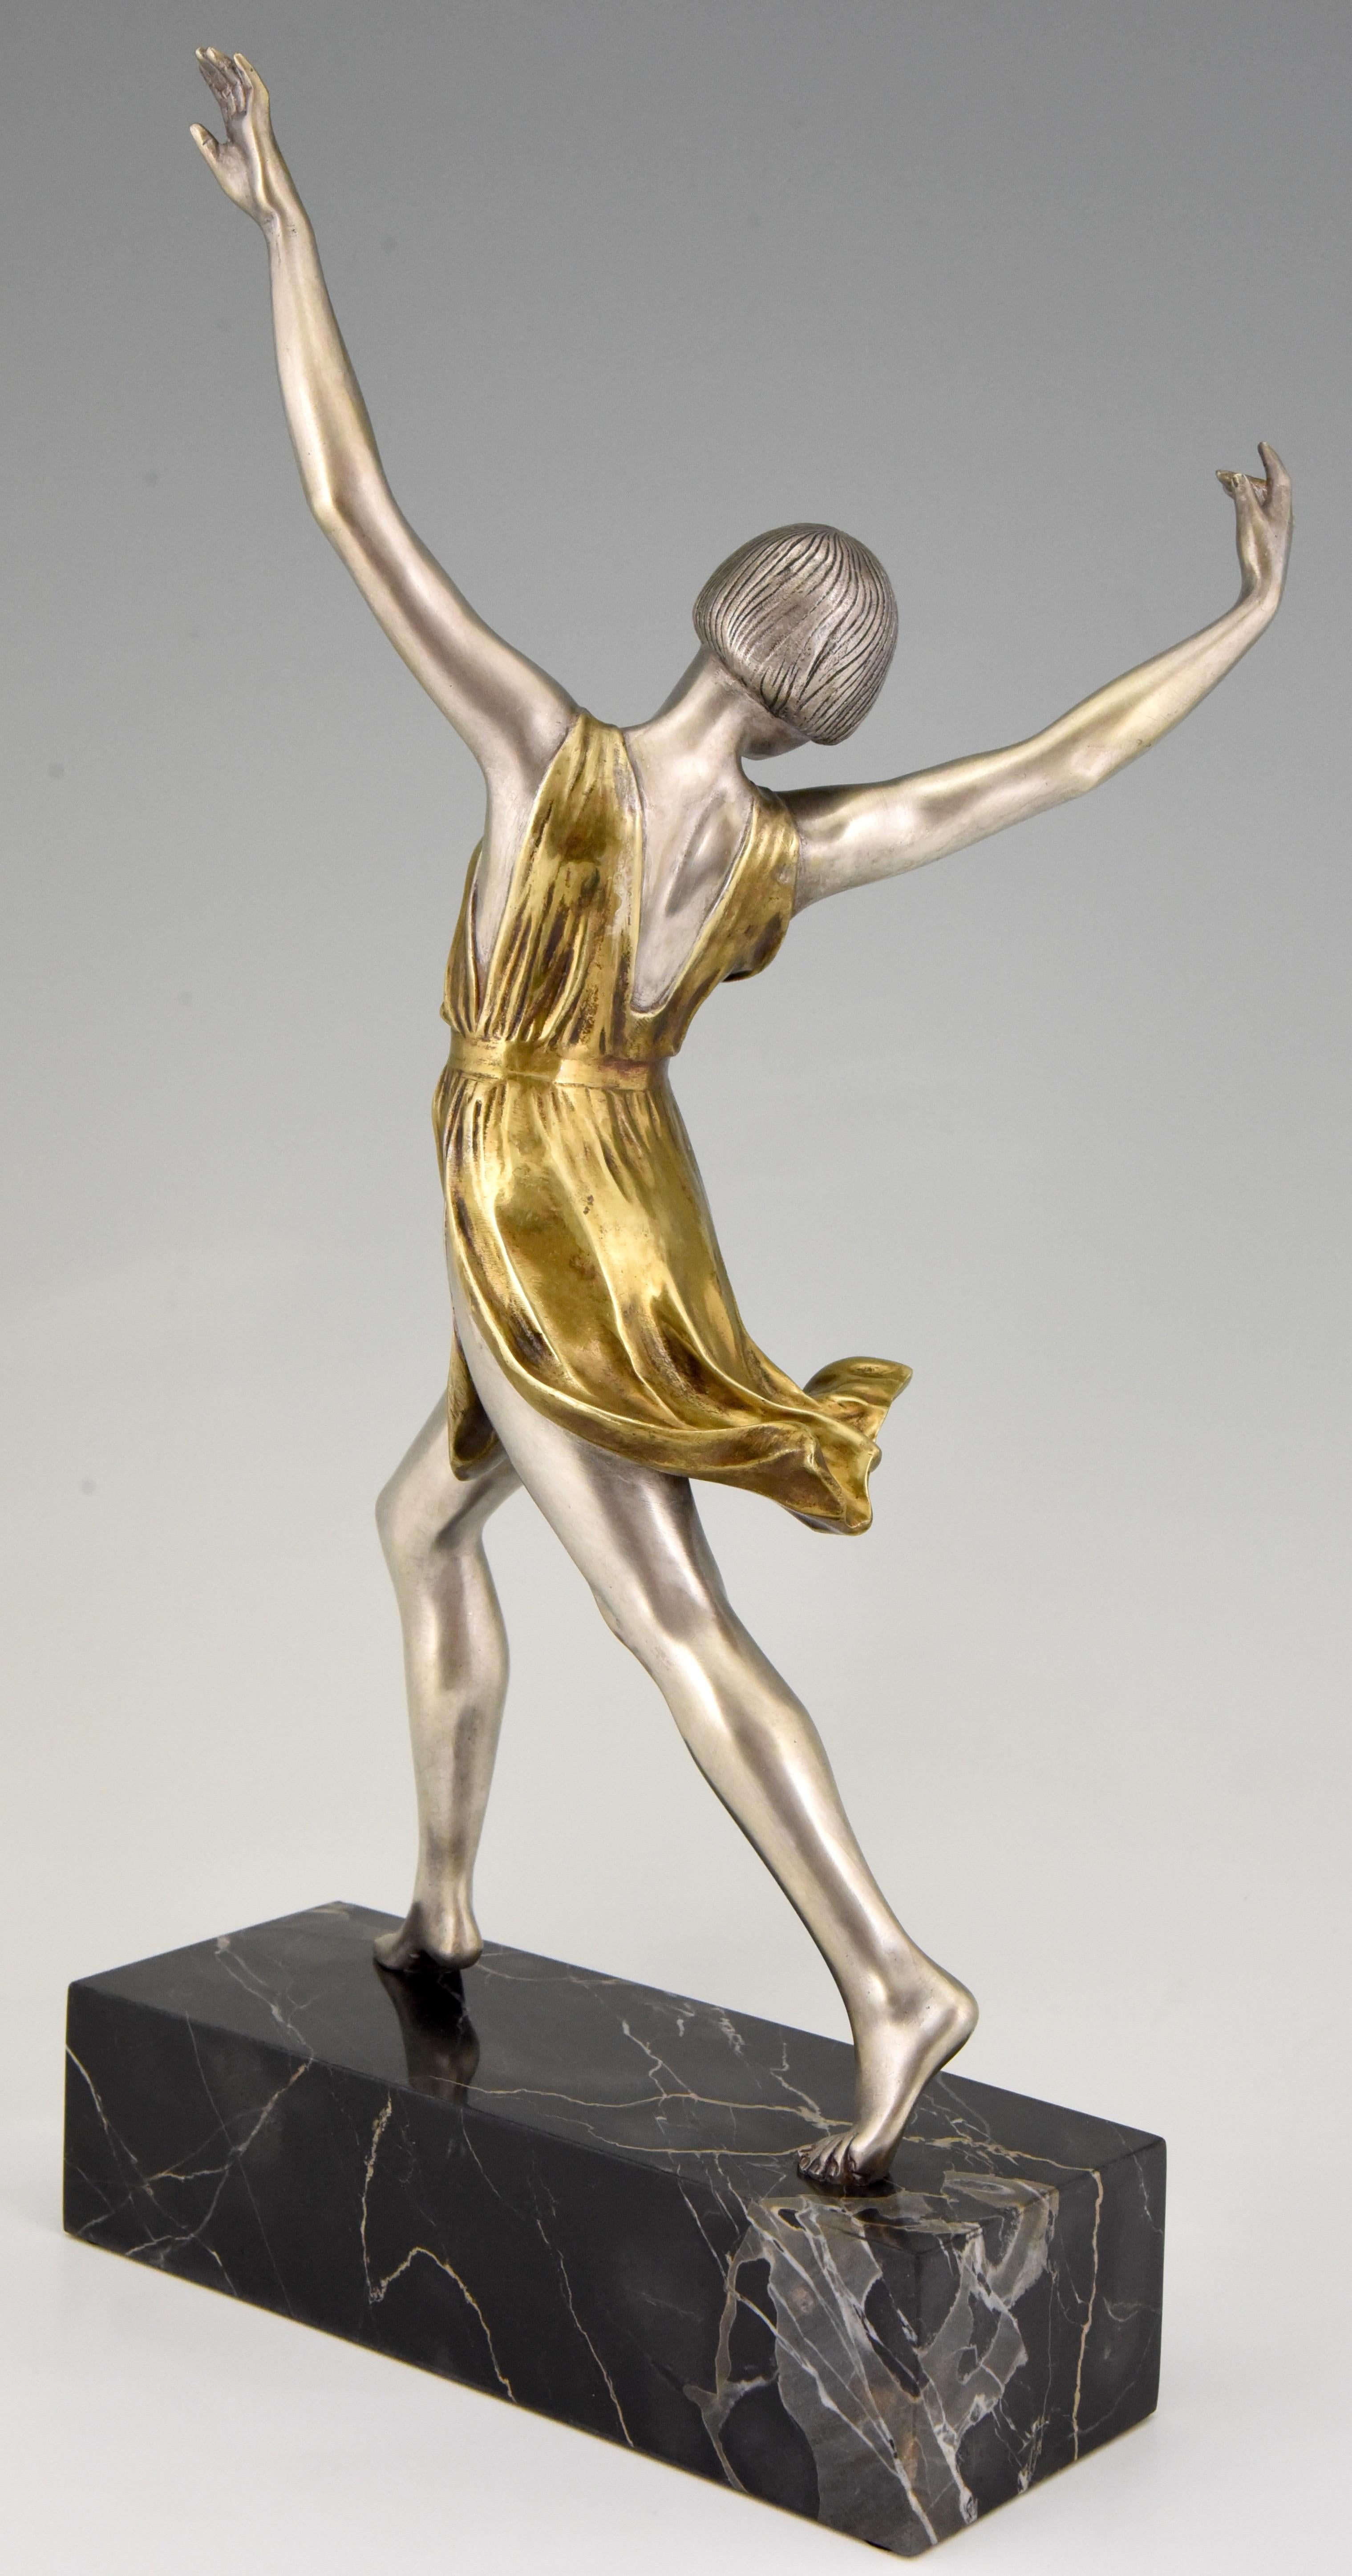 Early 20th Century Art Deco Bronze Sculpture of a Dancer Charles Muller, France, 1925